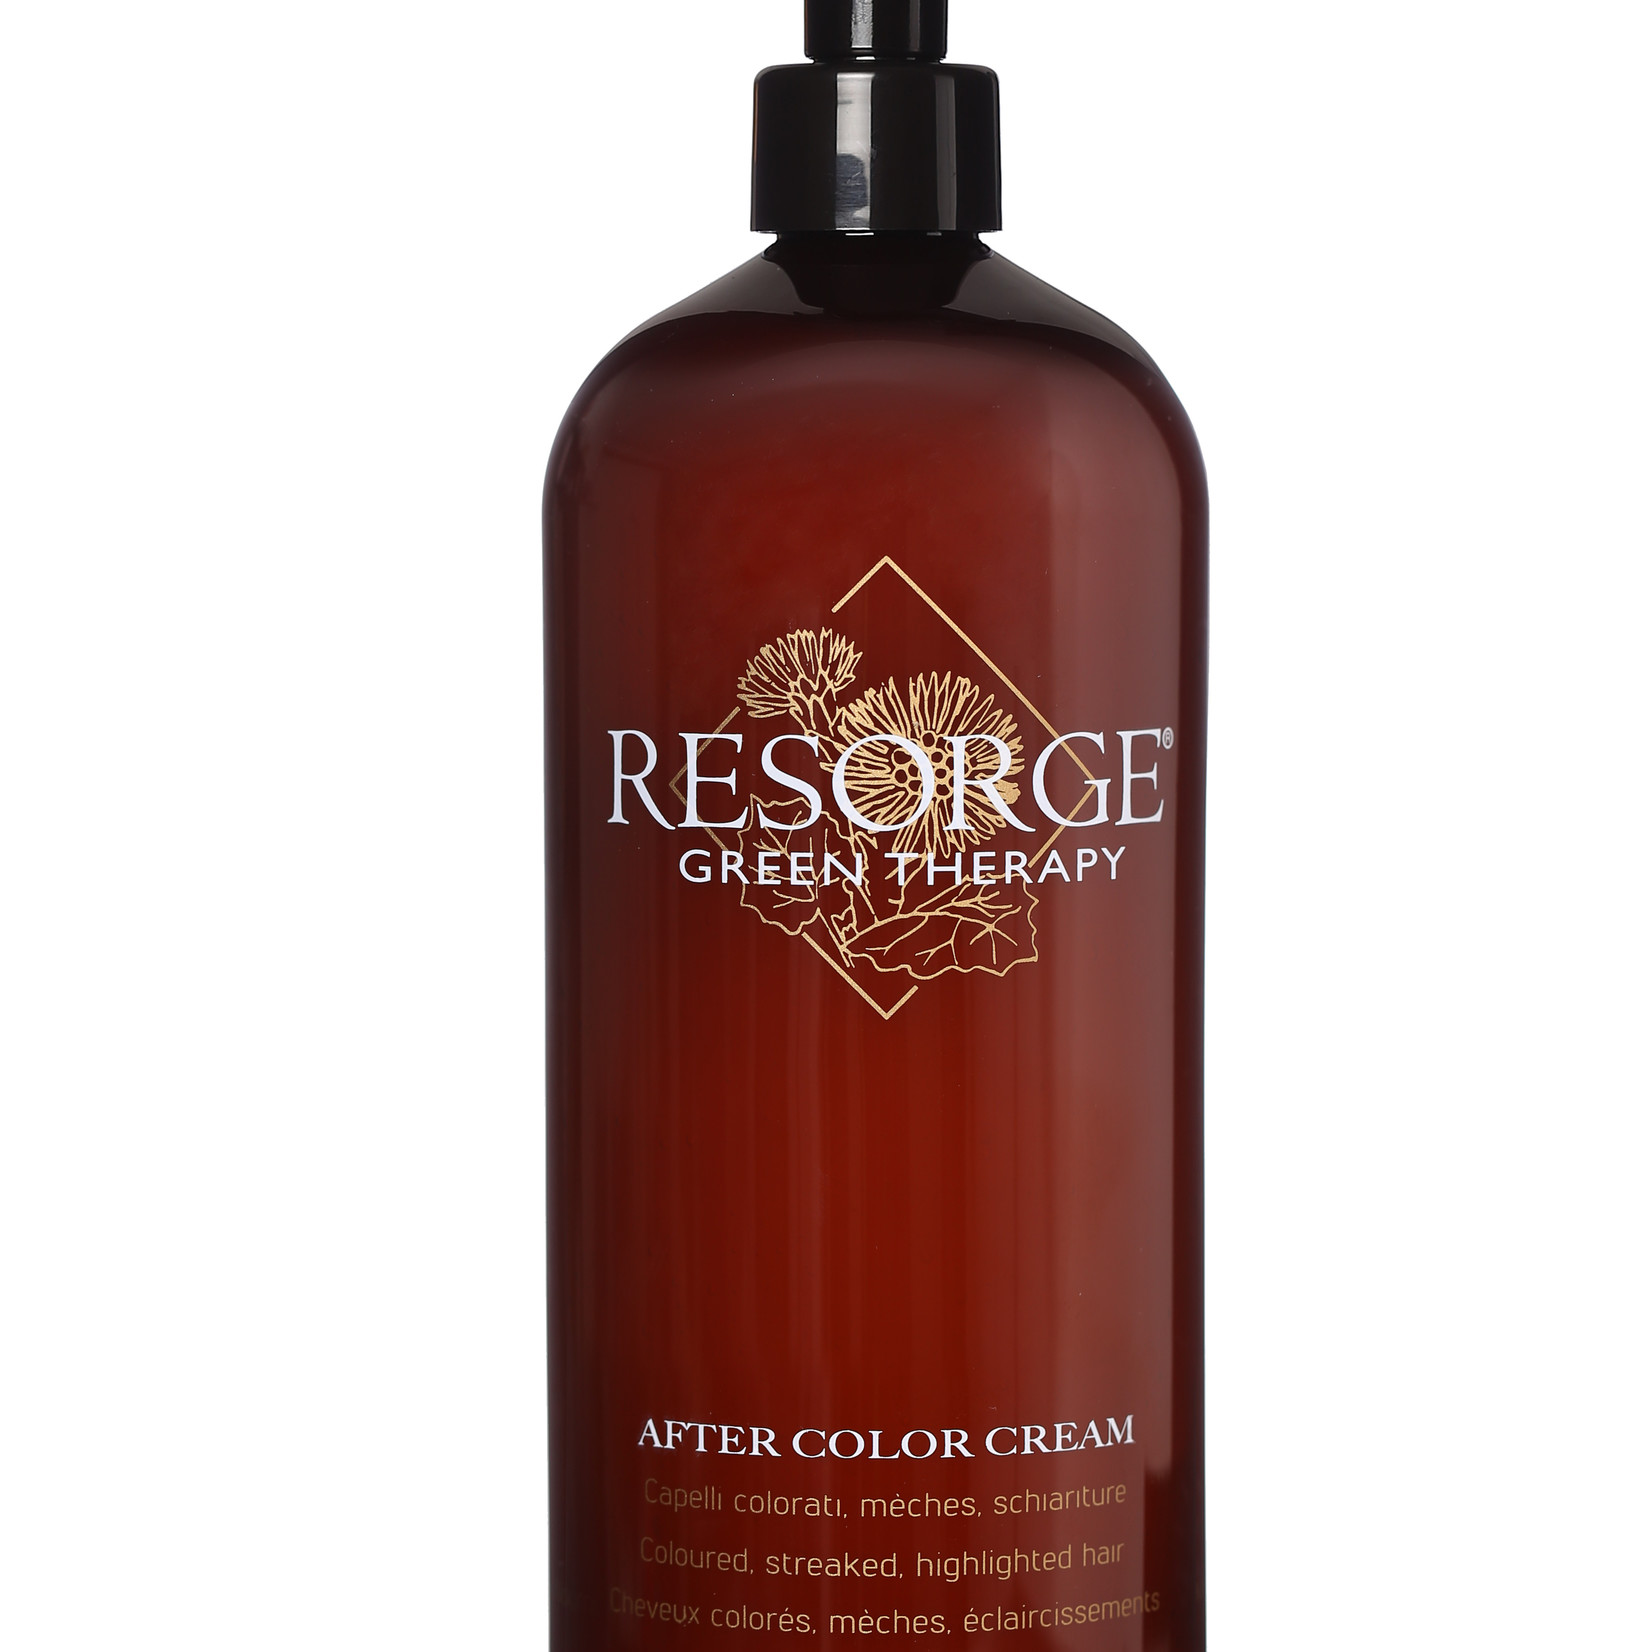 Biacre Resorge After Color Cream 1000 ml